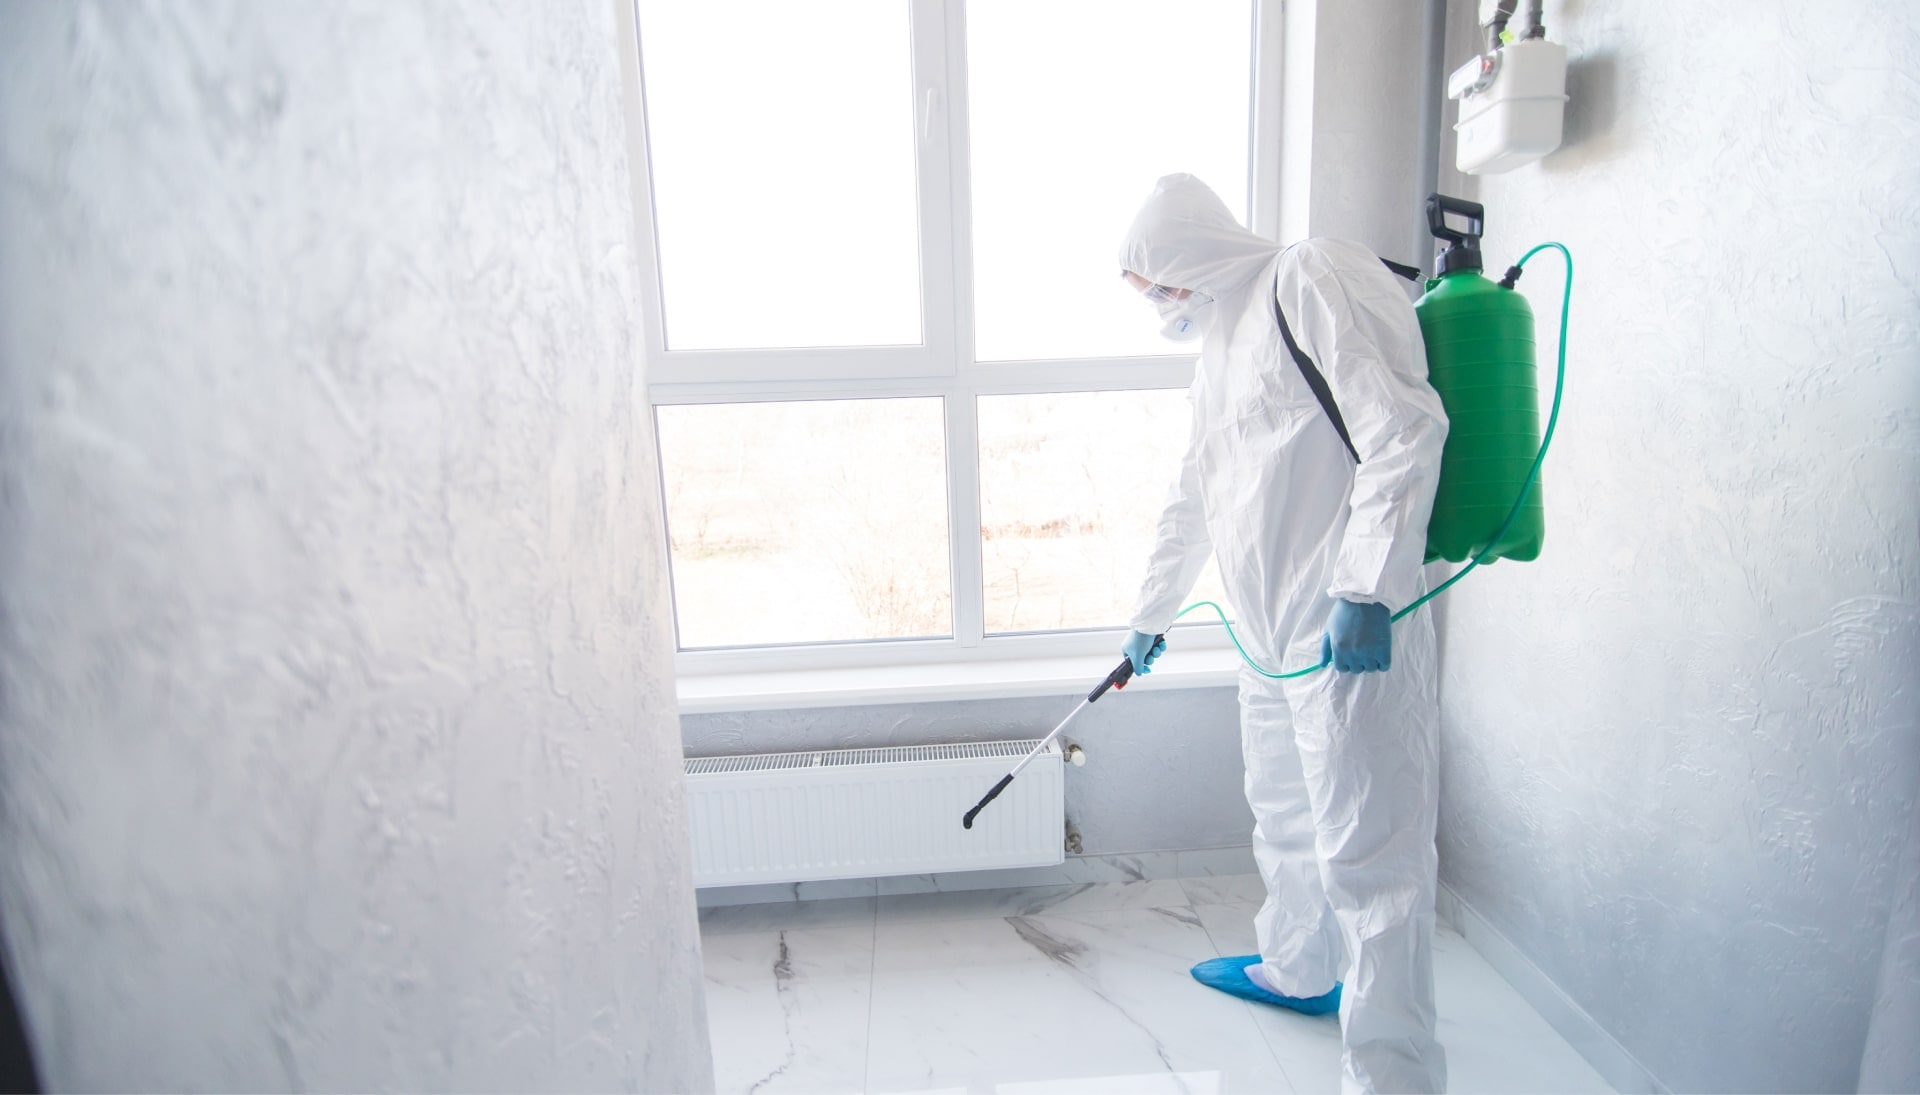 We provide the highest-quality mold inspection, testing, and removal services in the Speedway, Indiana area.